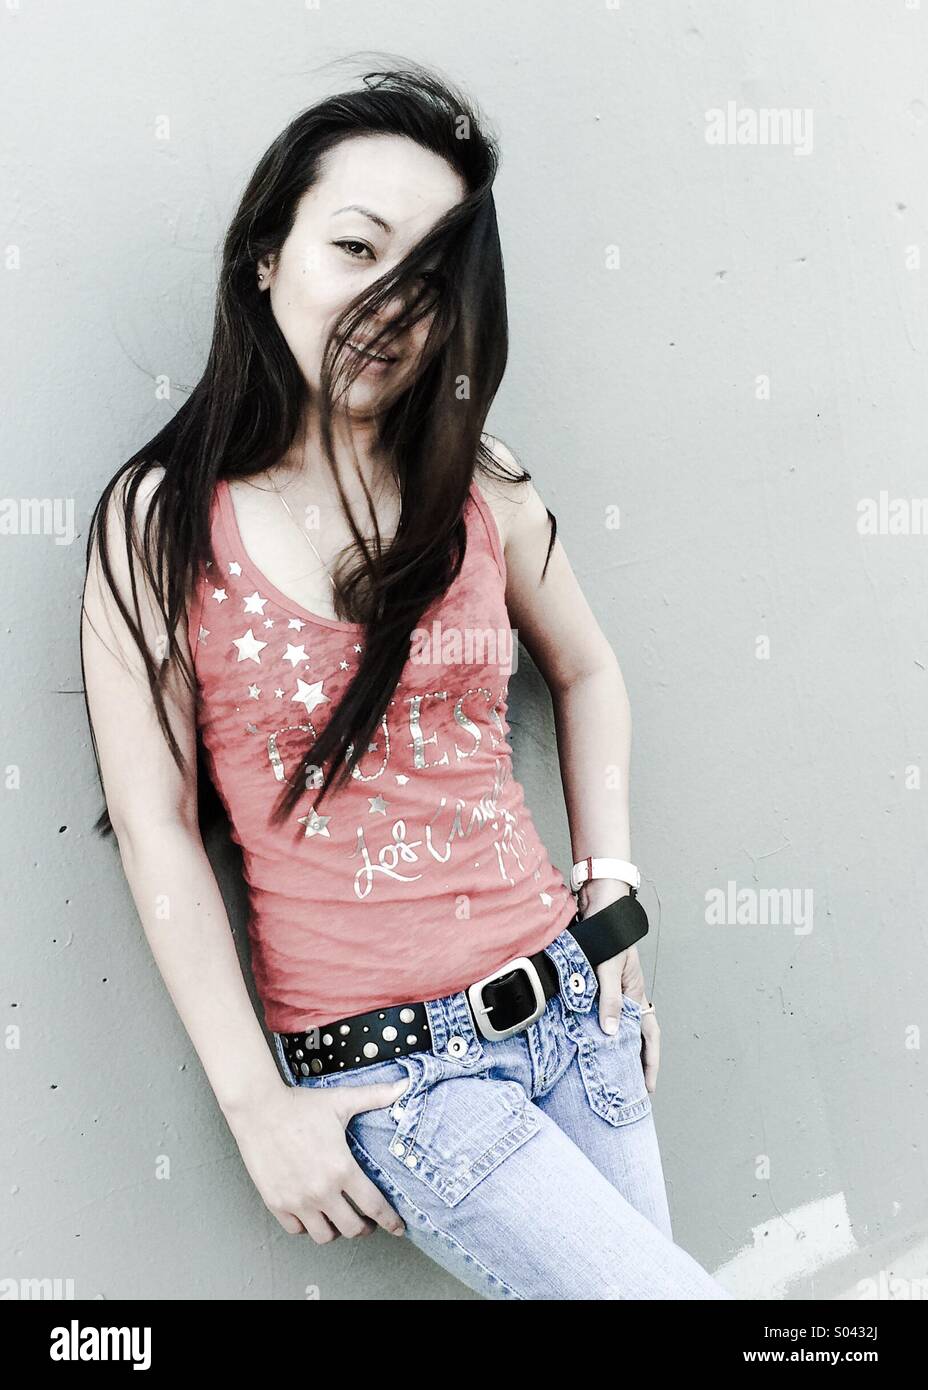 Asian girl leaning against a wall in a 3/4 pose Stock Photo - Alamy